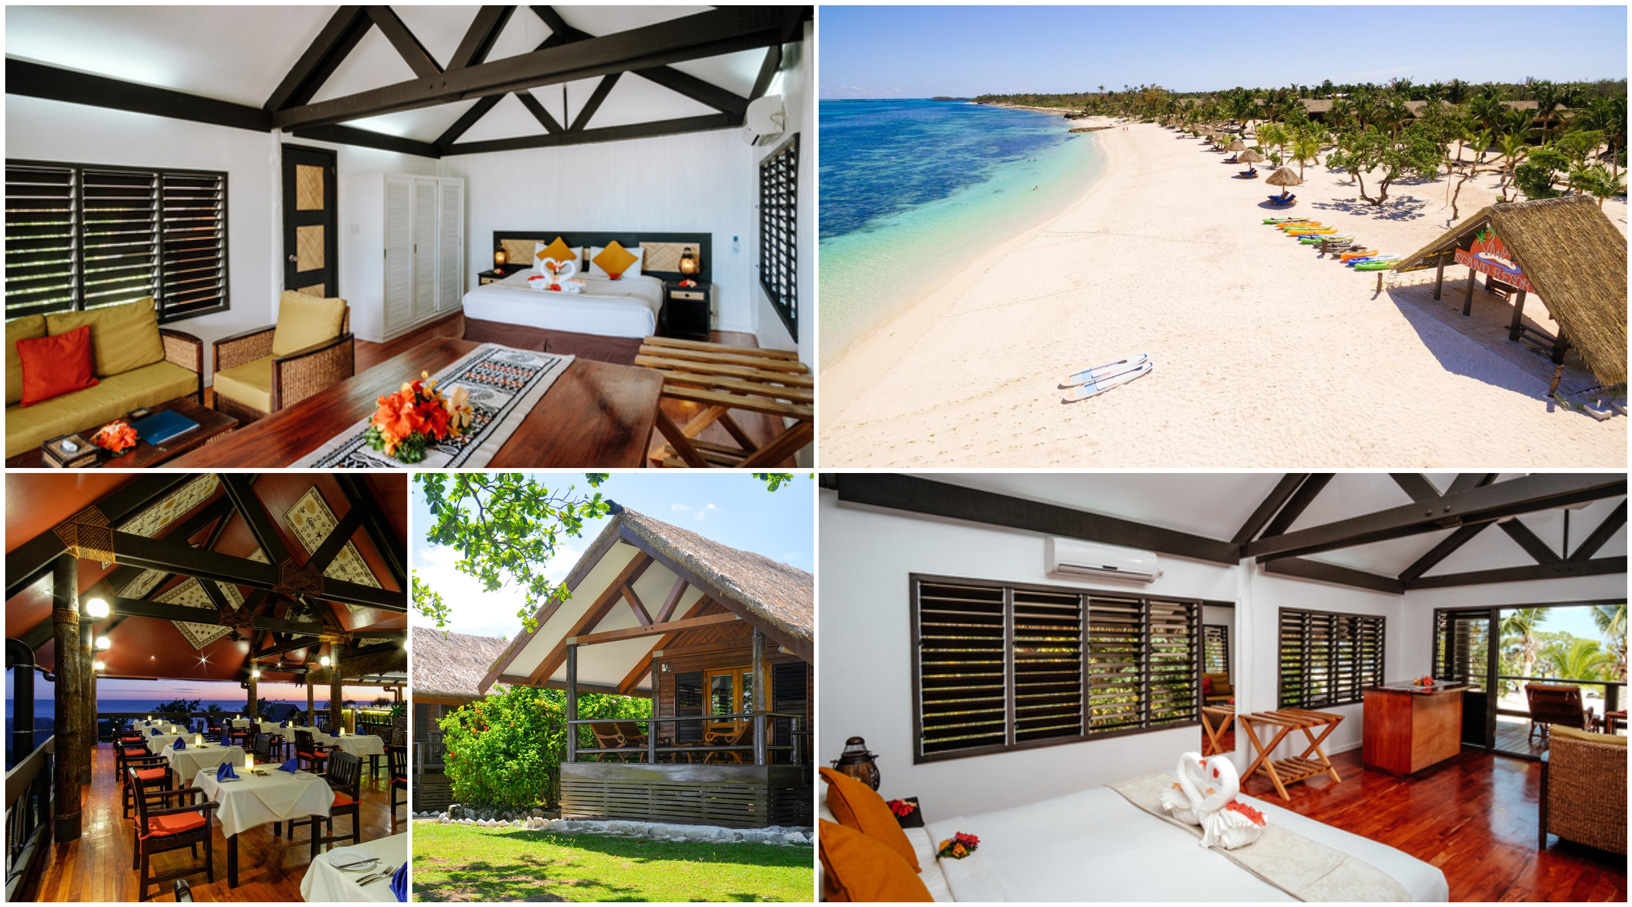 Holiday in Fiji - where to stay